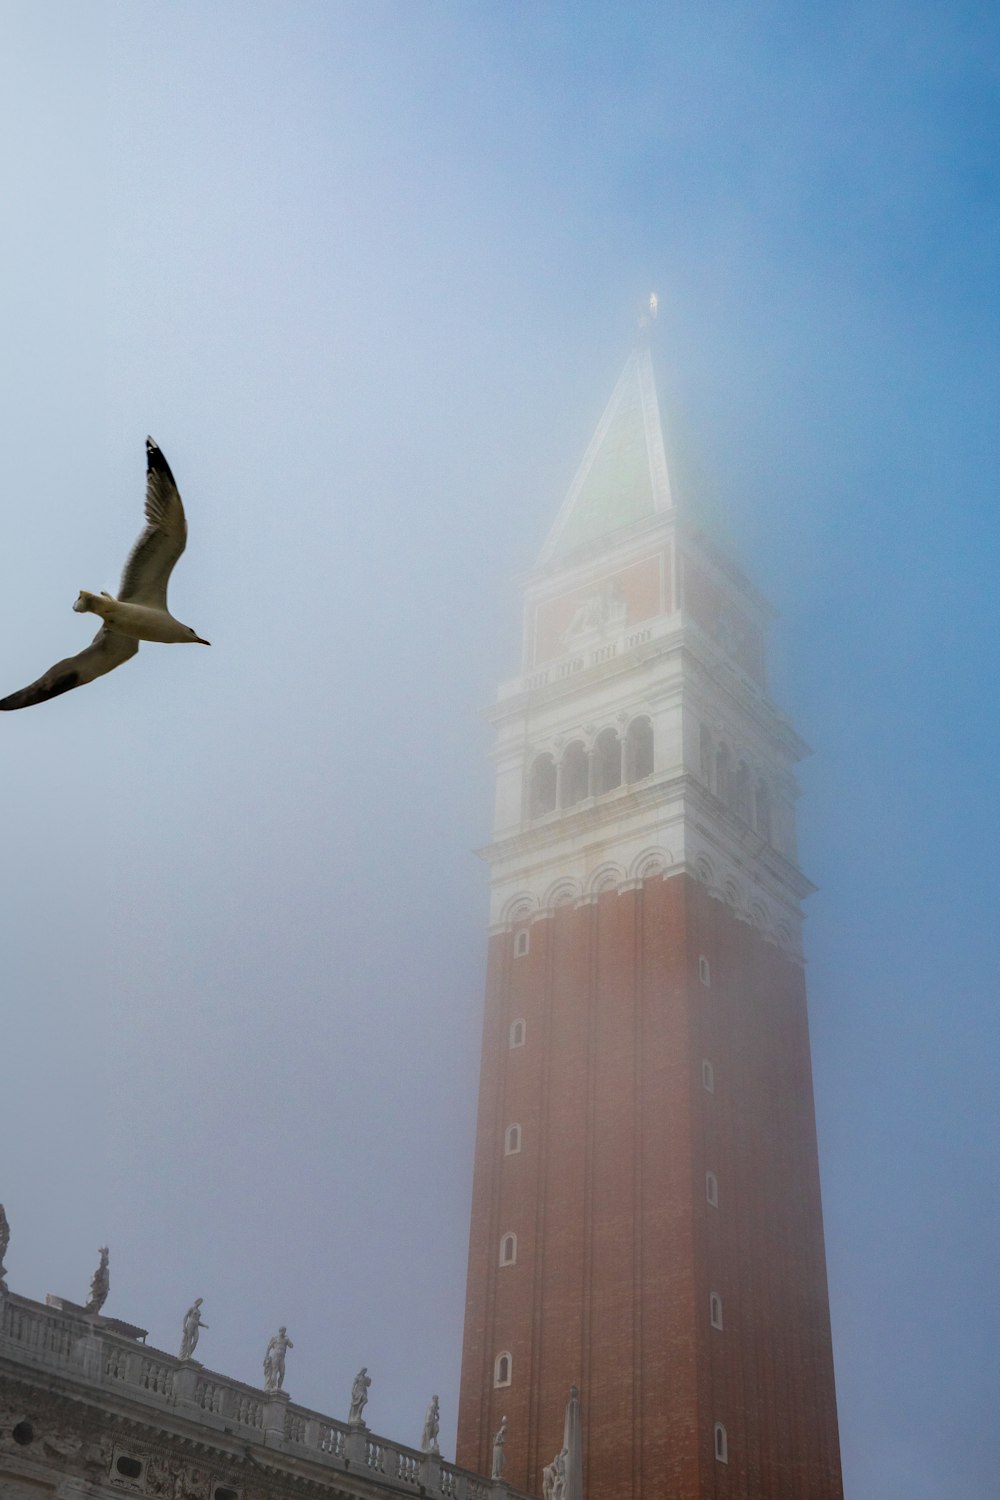 a bird flying in front of a clock tower